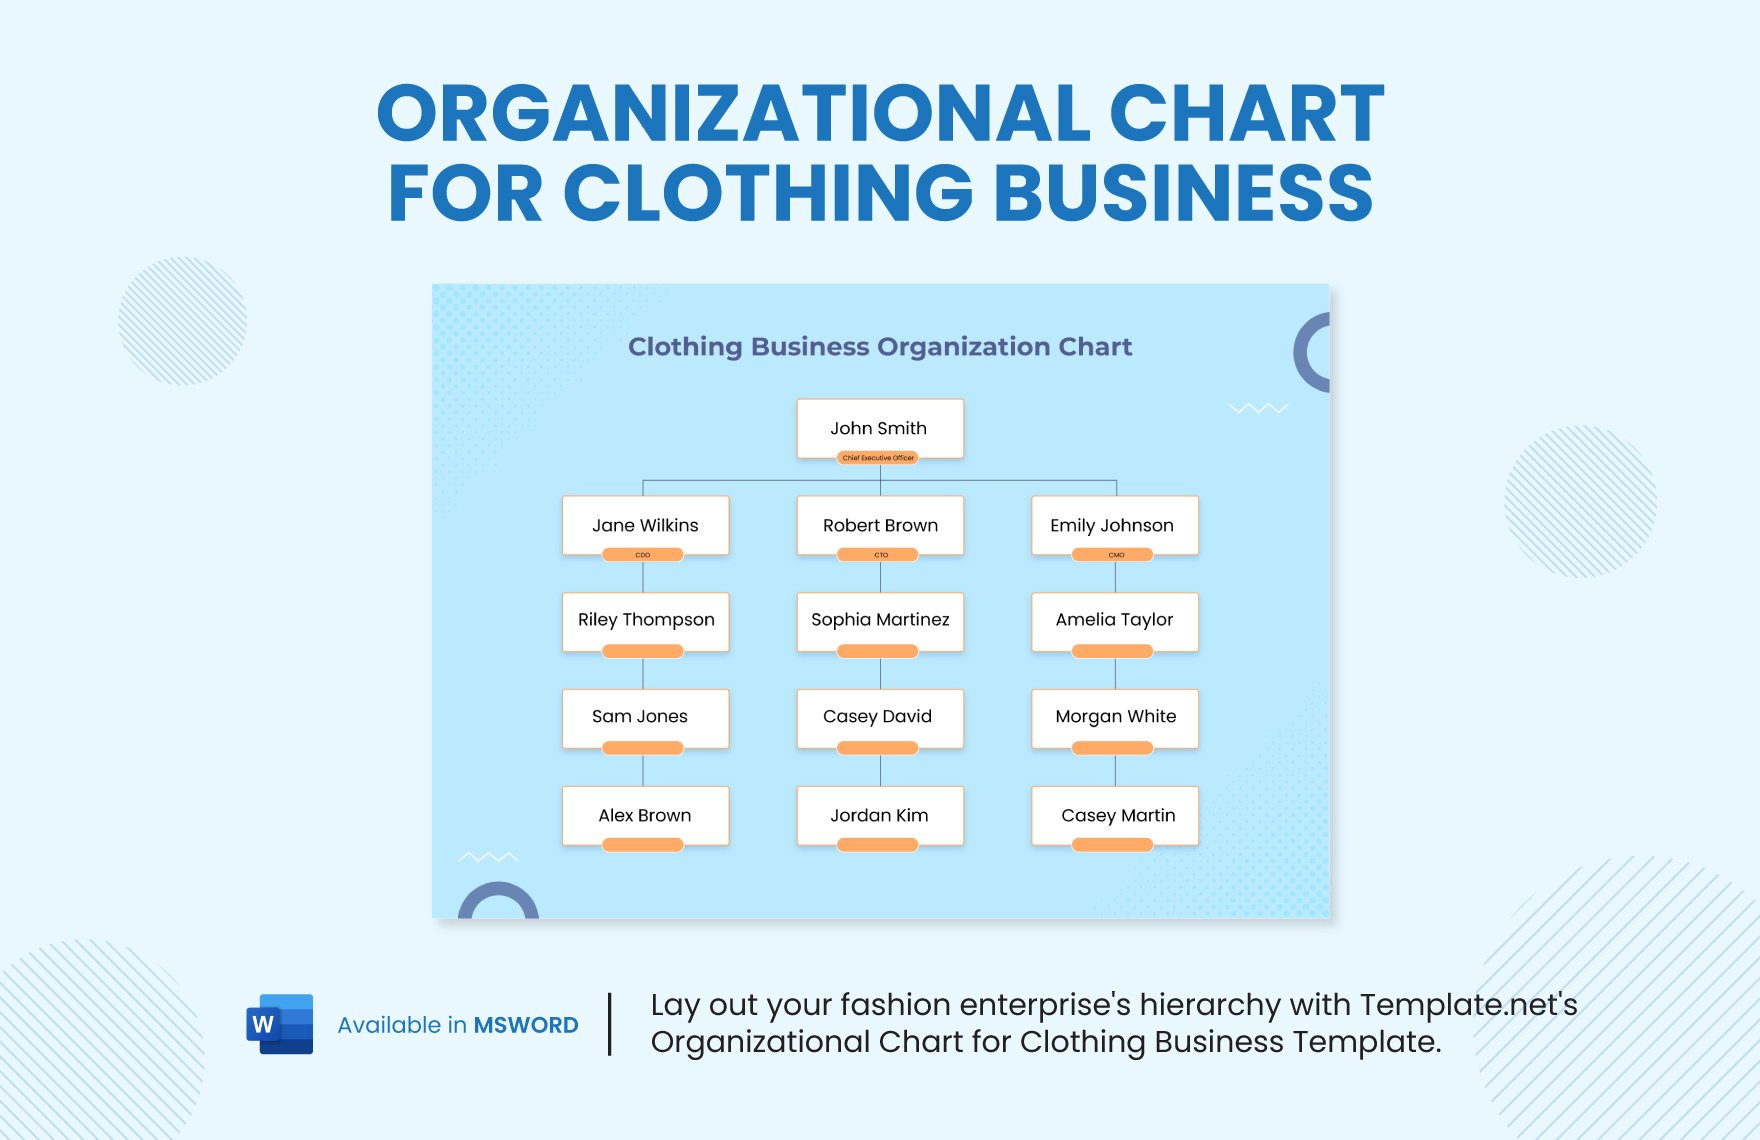 Organizational Chart for Clothing Business Template